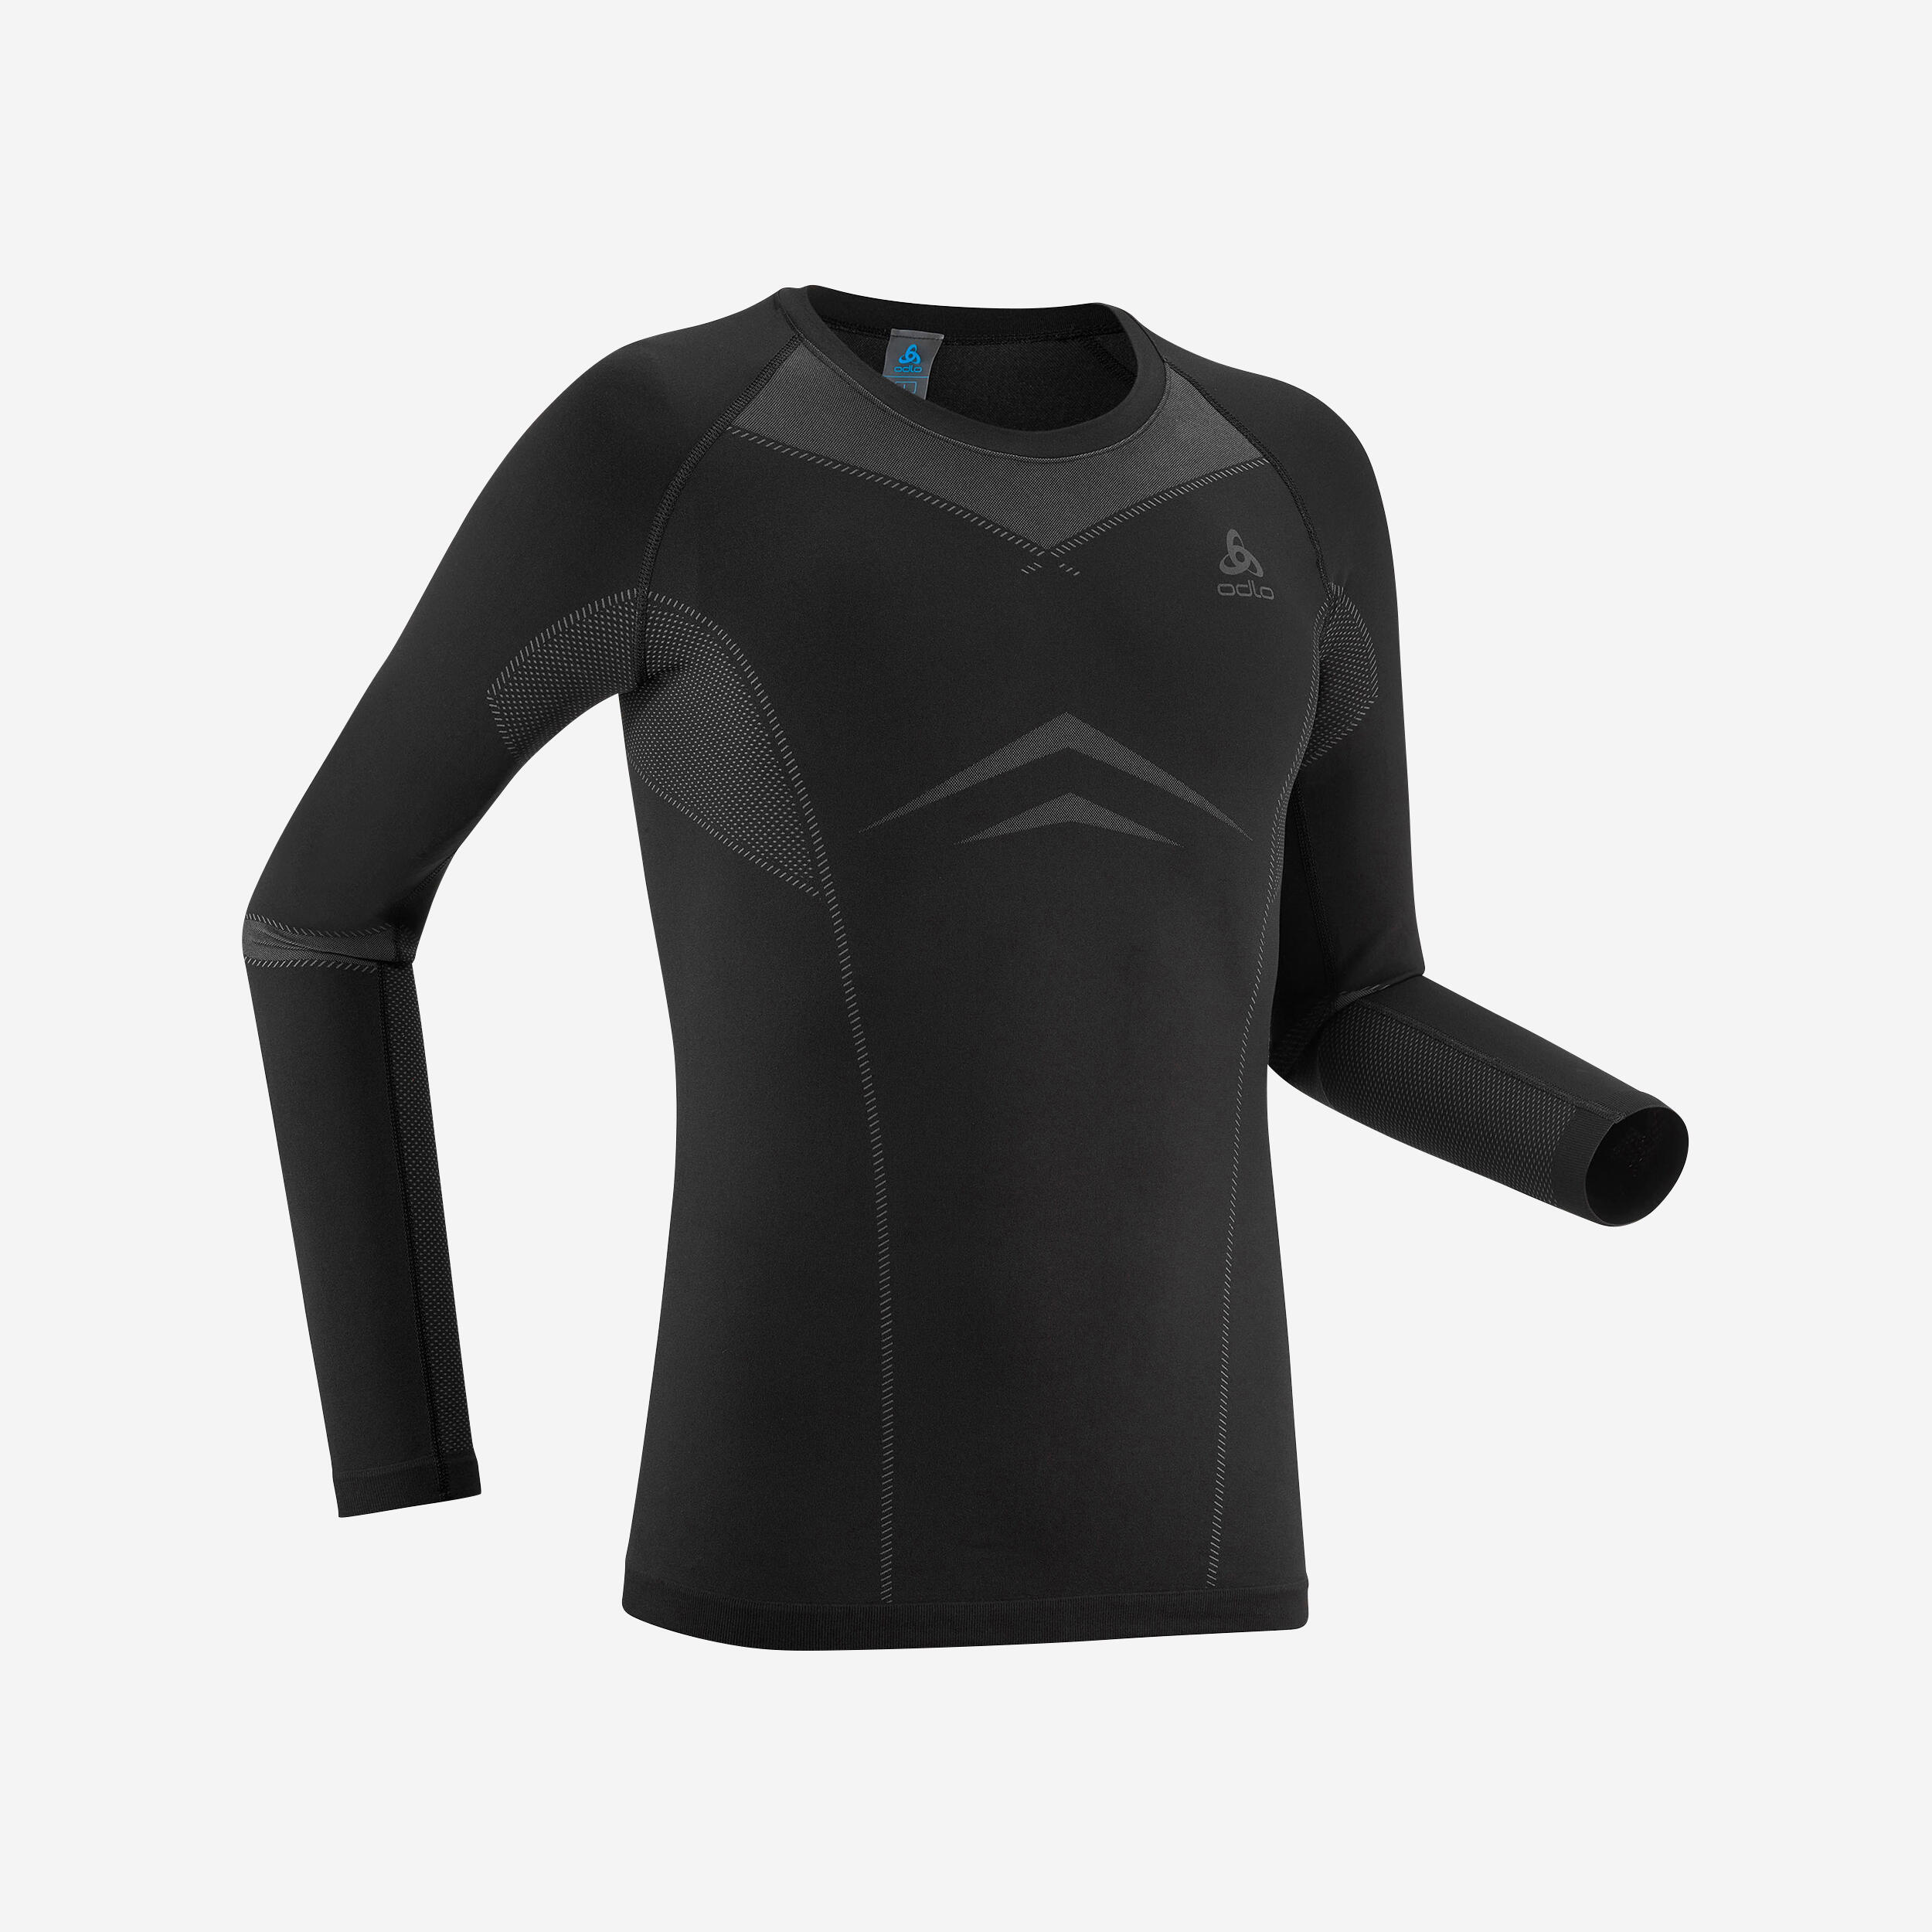 Base layer & thermal set for fly fishing - dry & warm